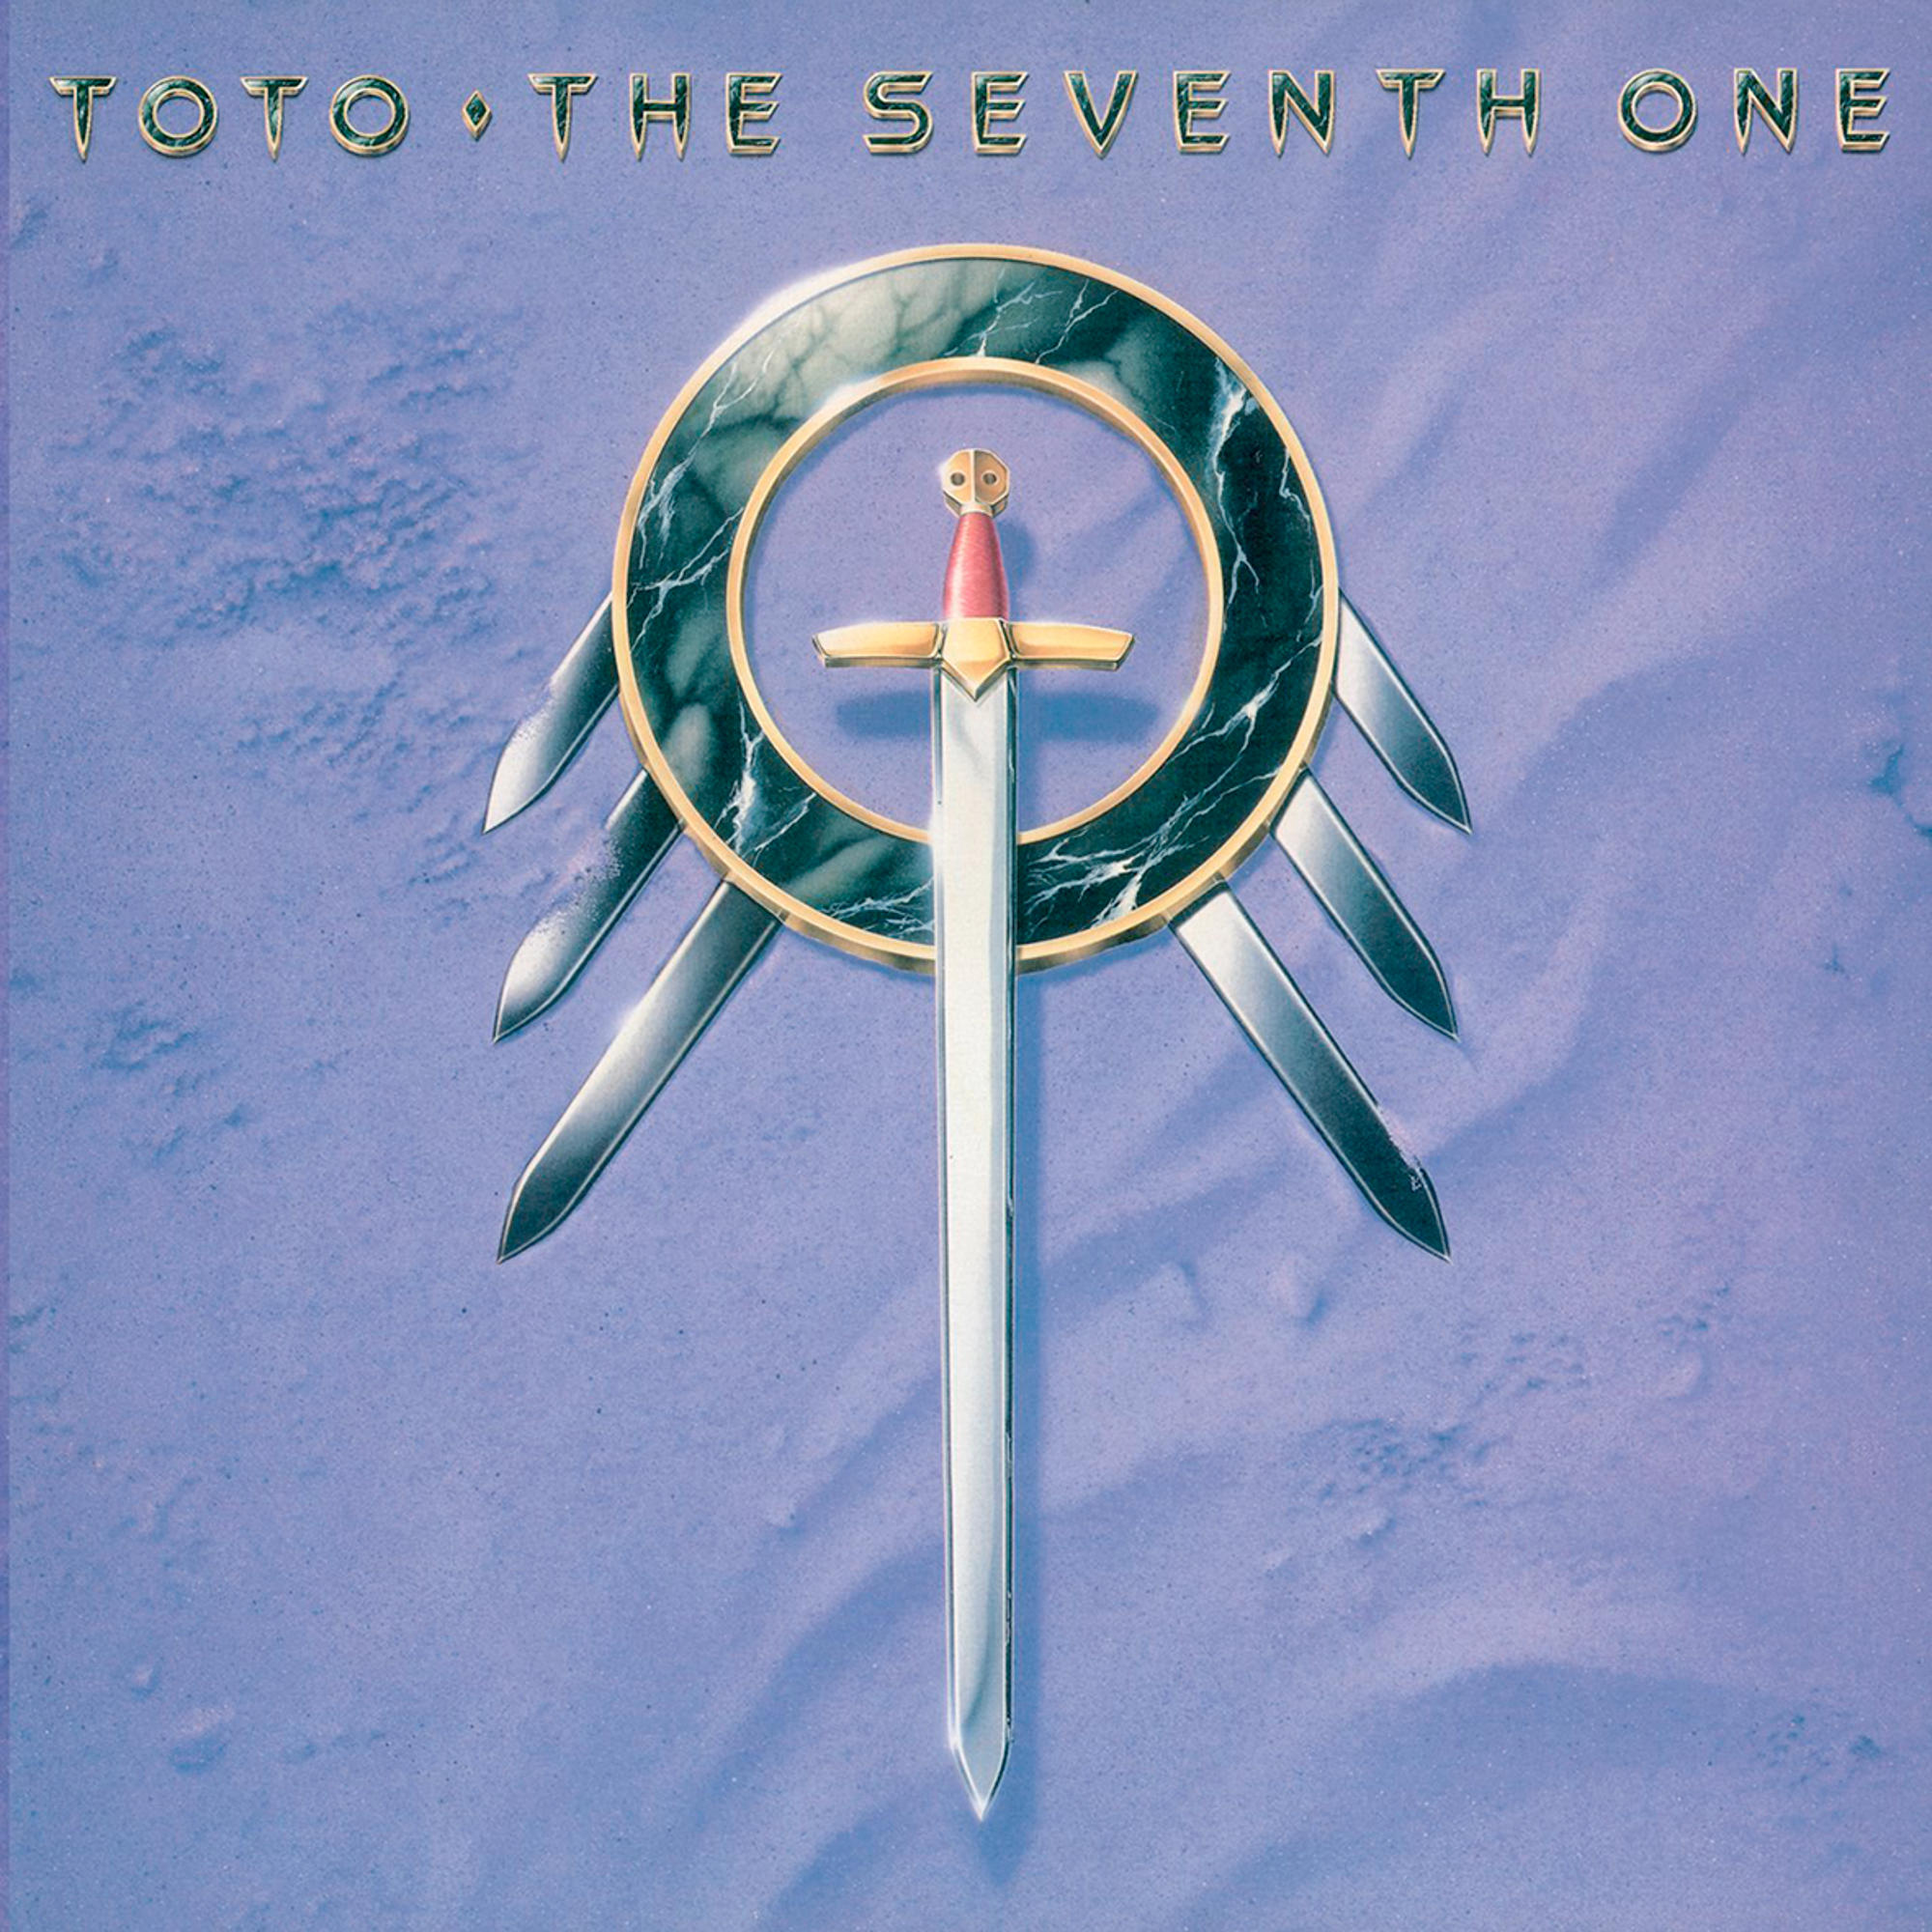 Toto - One Edition) Collectors - Seventh (CD) The (Limited